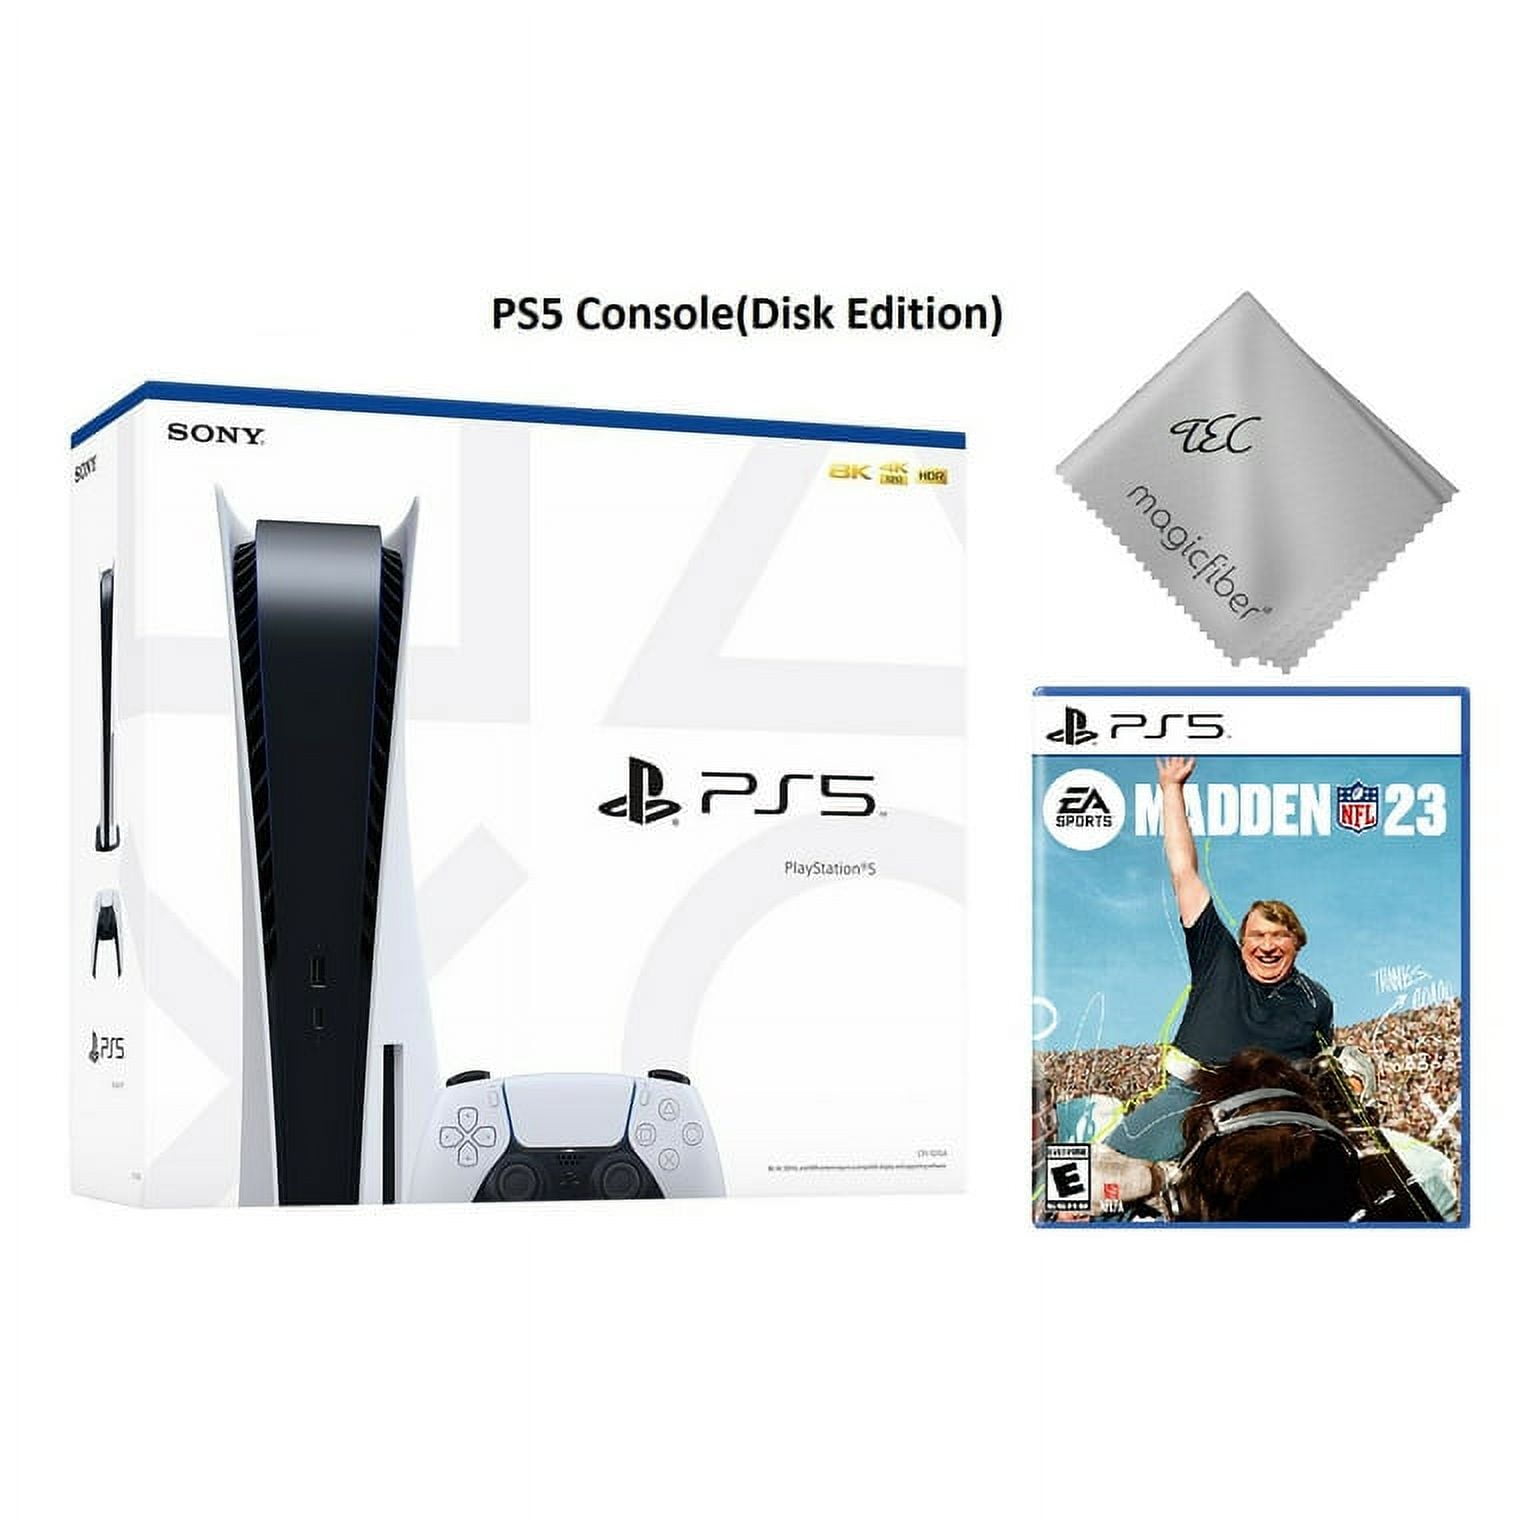 Get a PS5 Digital edition with an extra controller and FIFA 23 for the  perfect holiday gift.